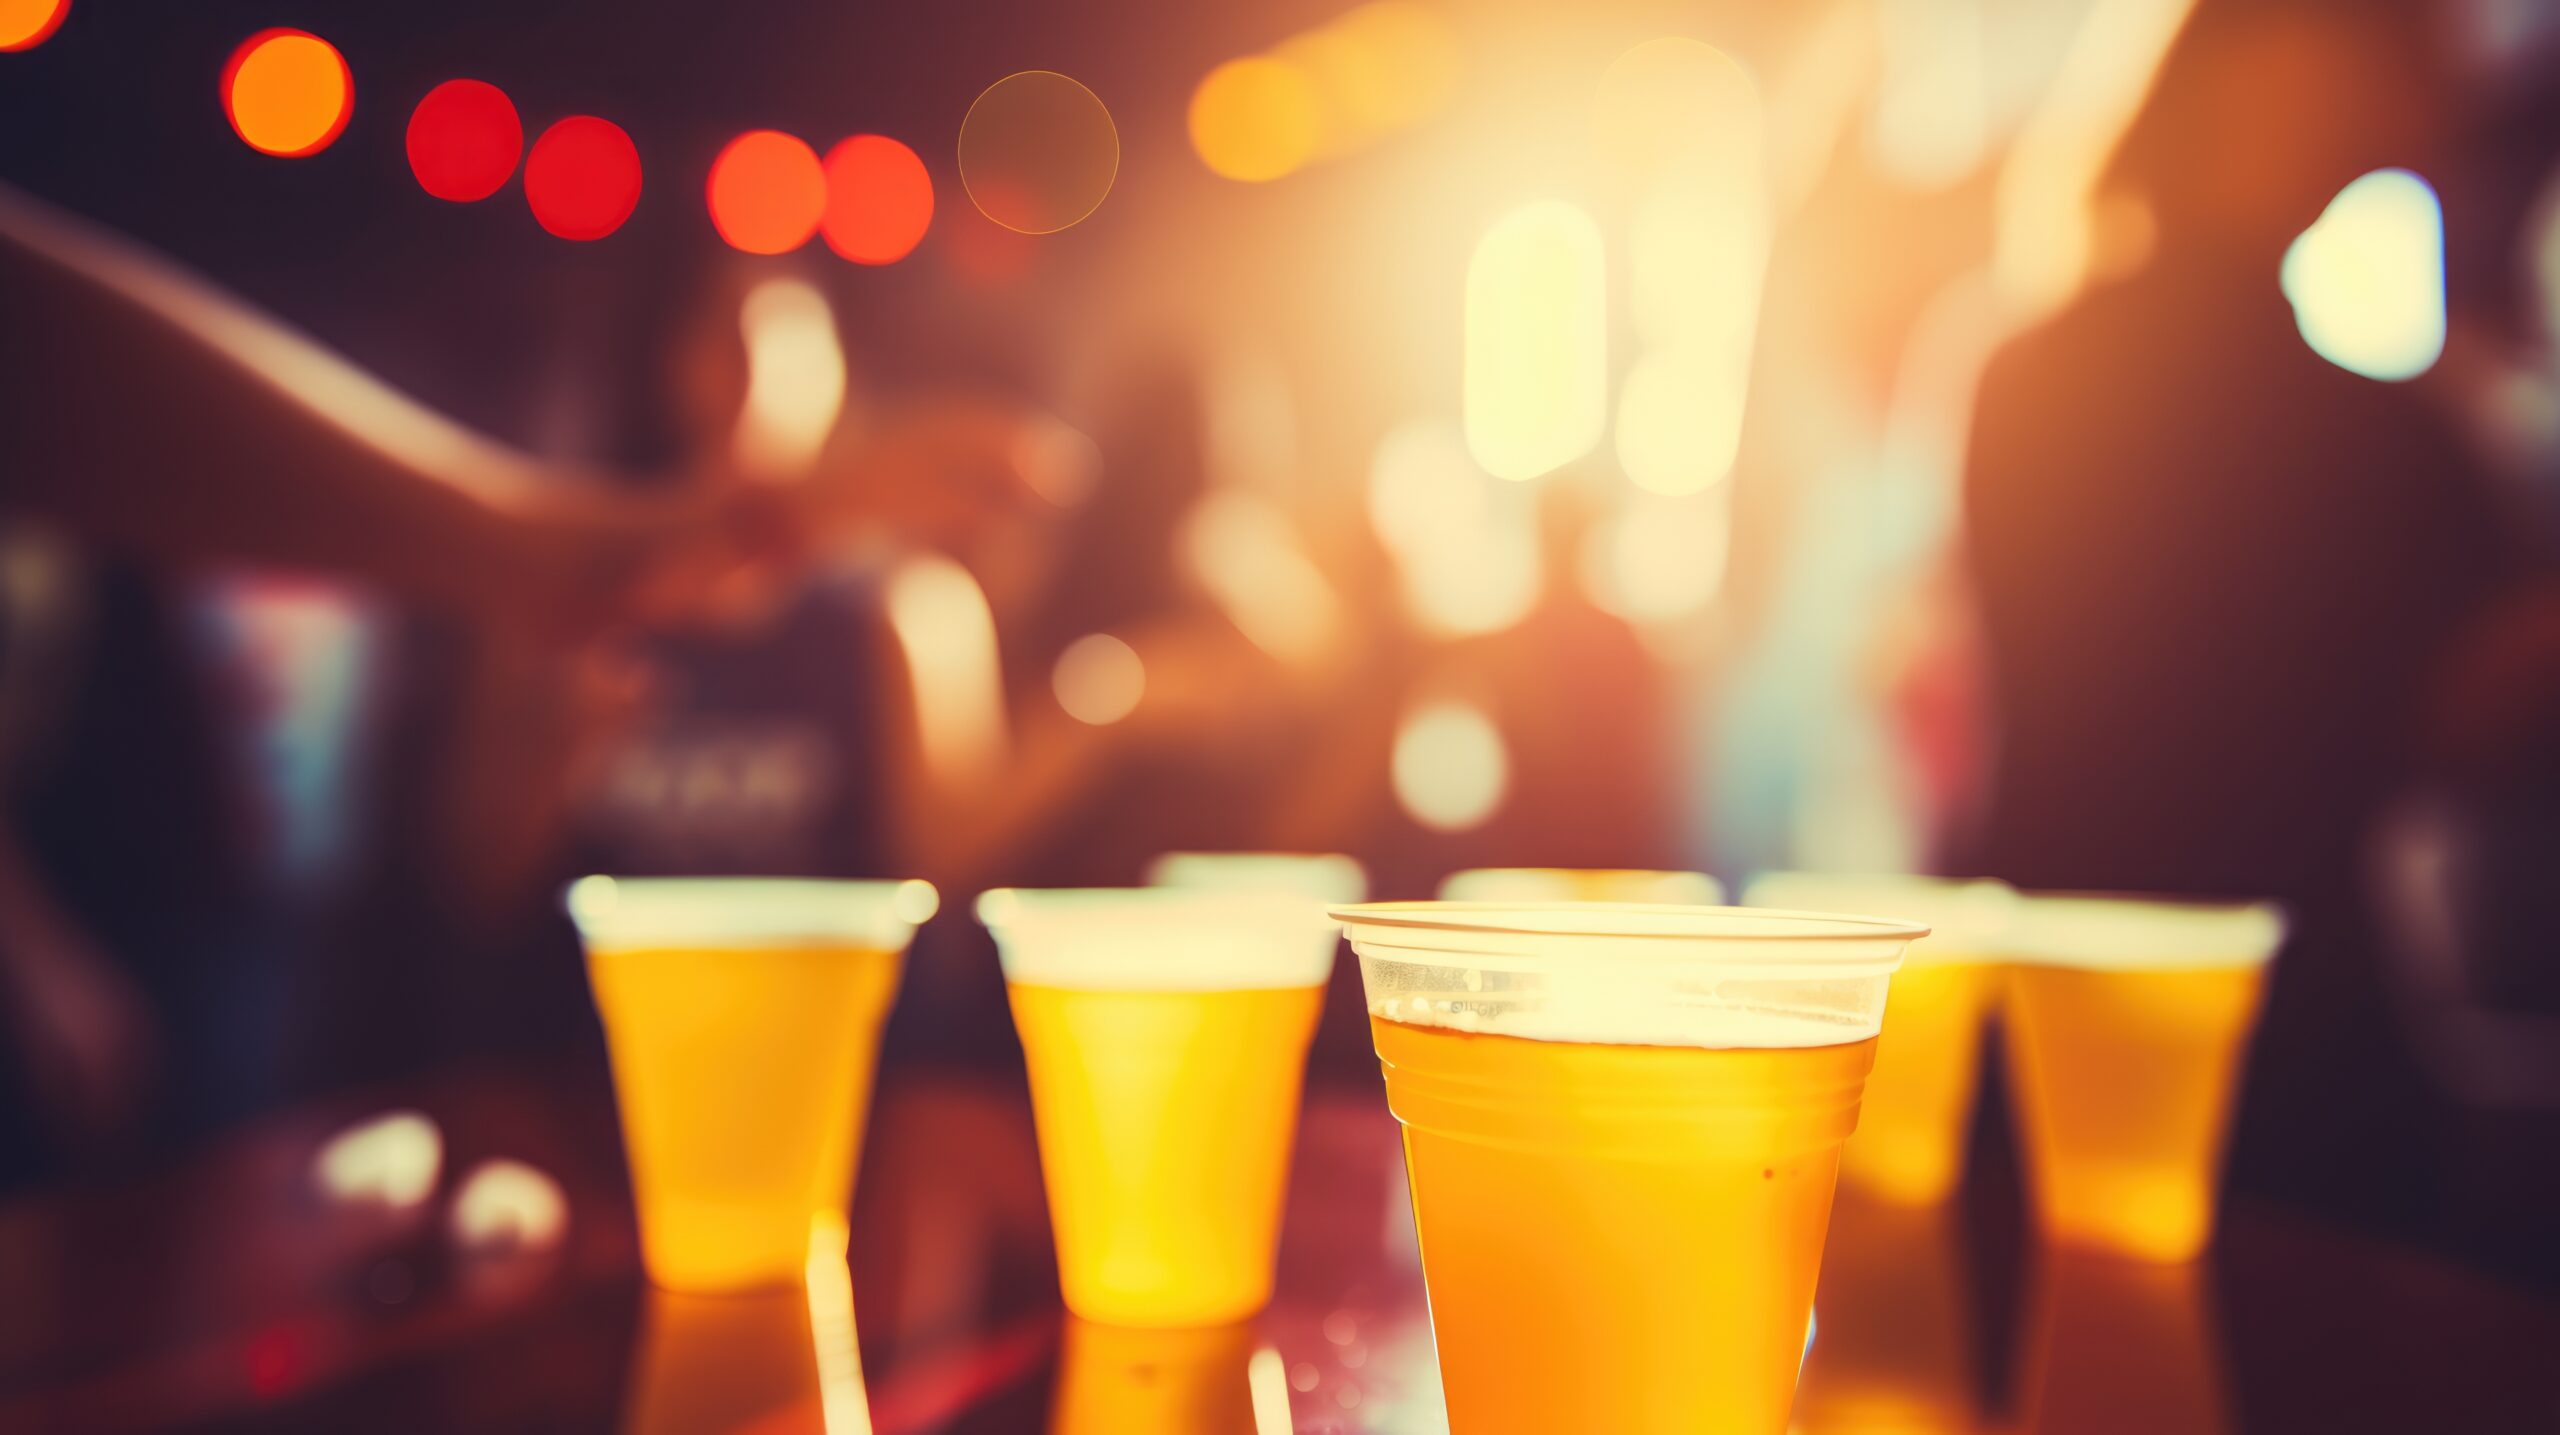 Beer in plastic cups with blurred lights behind